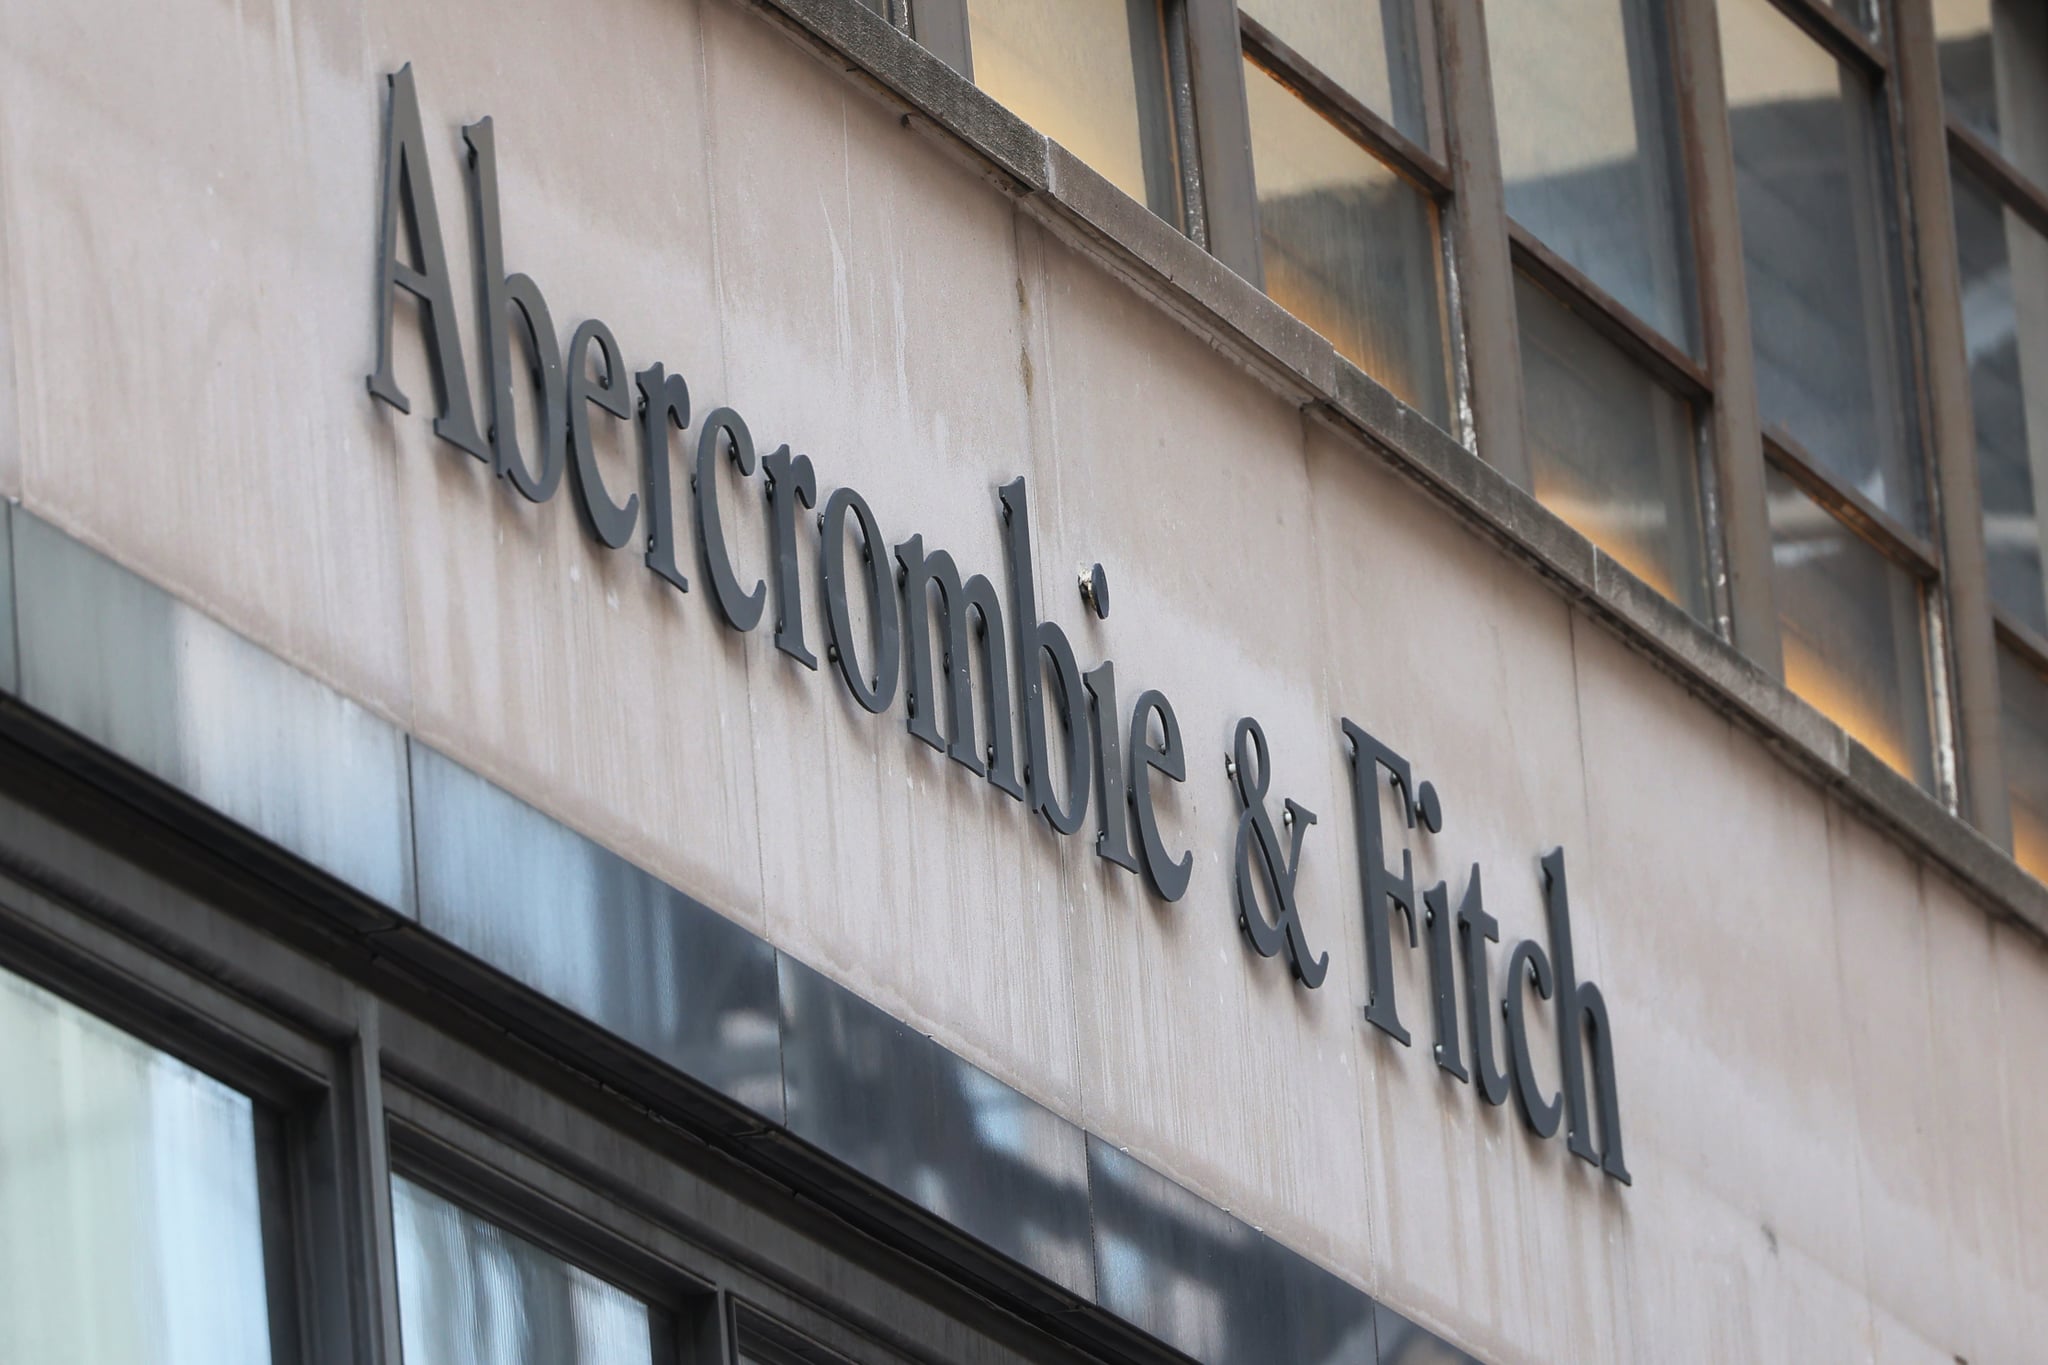 NEW YORK, NEW YORK - AUGUST 25: An Abercrombie & Fitch signage is seen on a store on Fifth Avenue on August 25, 2022 in New York City. The Abercrombie retail store, which also owns the Hollister chain, announced that it expects it's full-year net sales to decline from 2021. The company had predicted that its 2022 sales would be flat or increase. Sales fell 7% to $805.1 million in the second quarter.  (Photo by Michael M. Santiago/Getty Images)